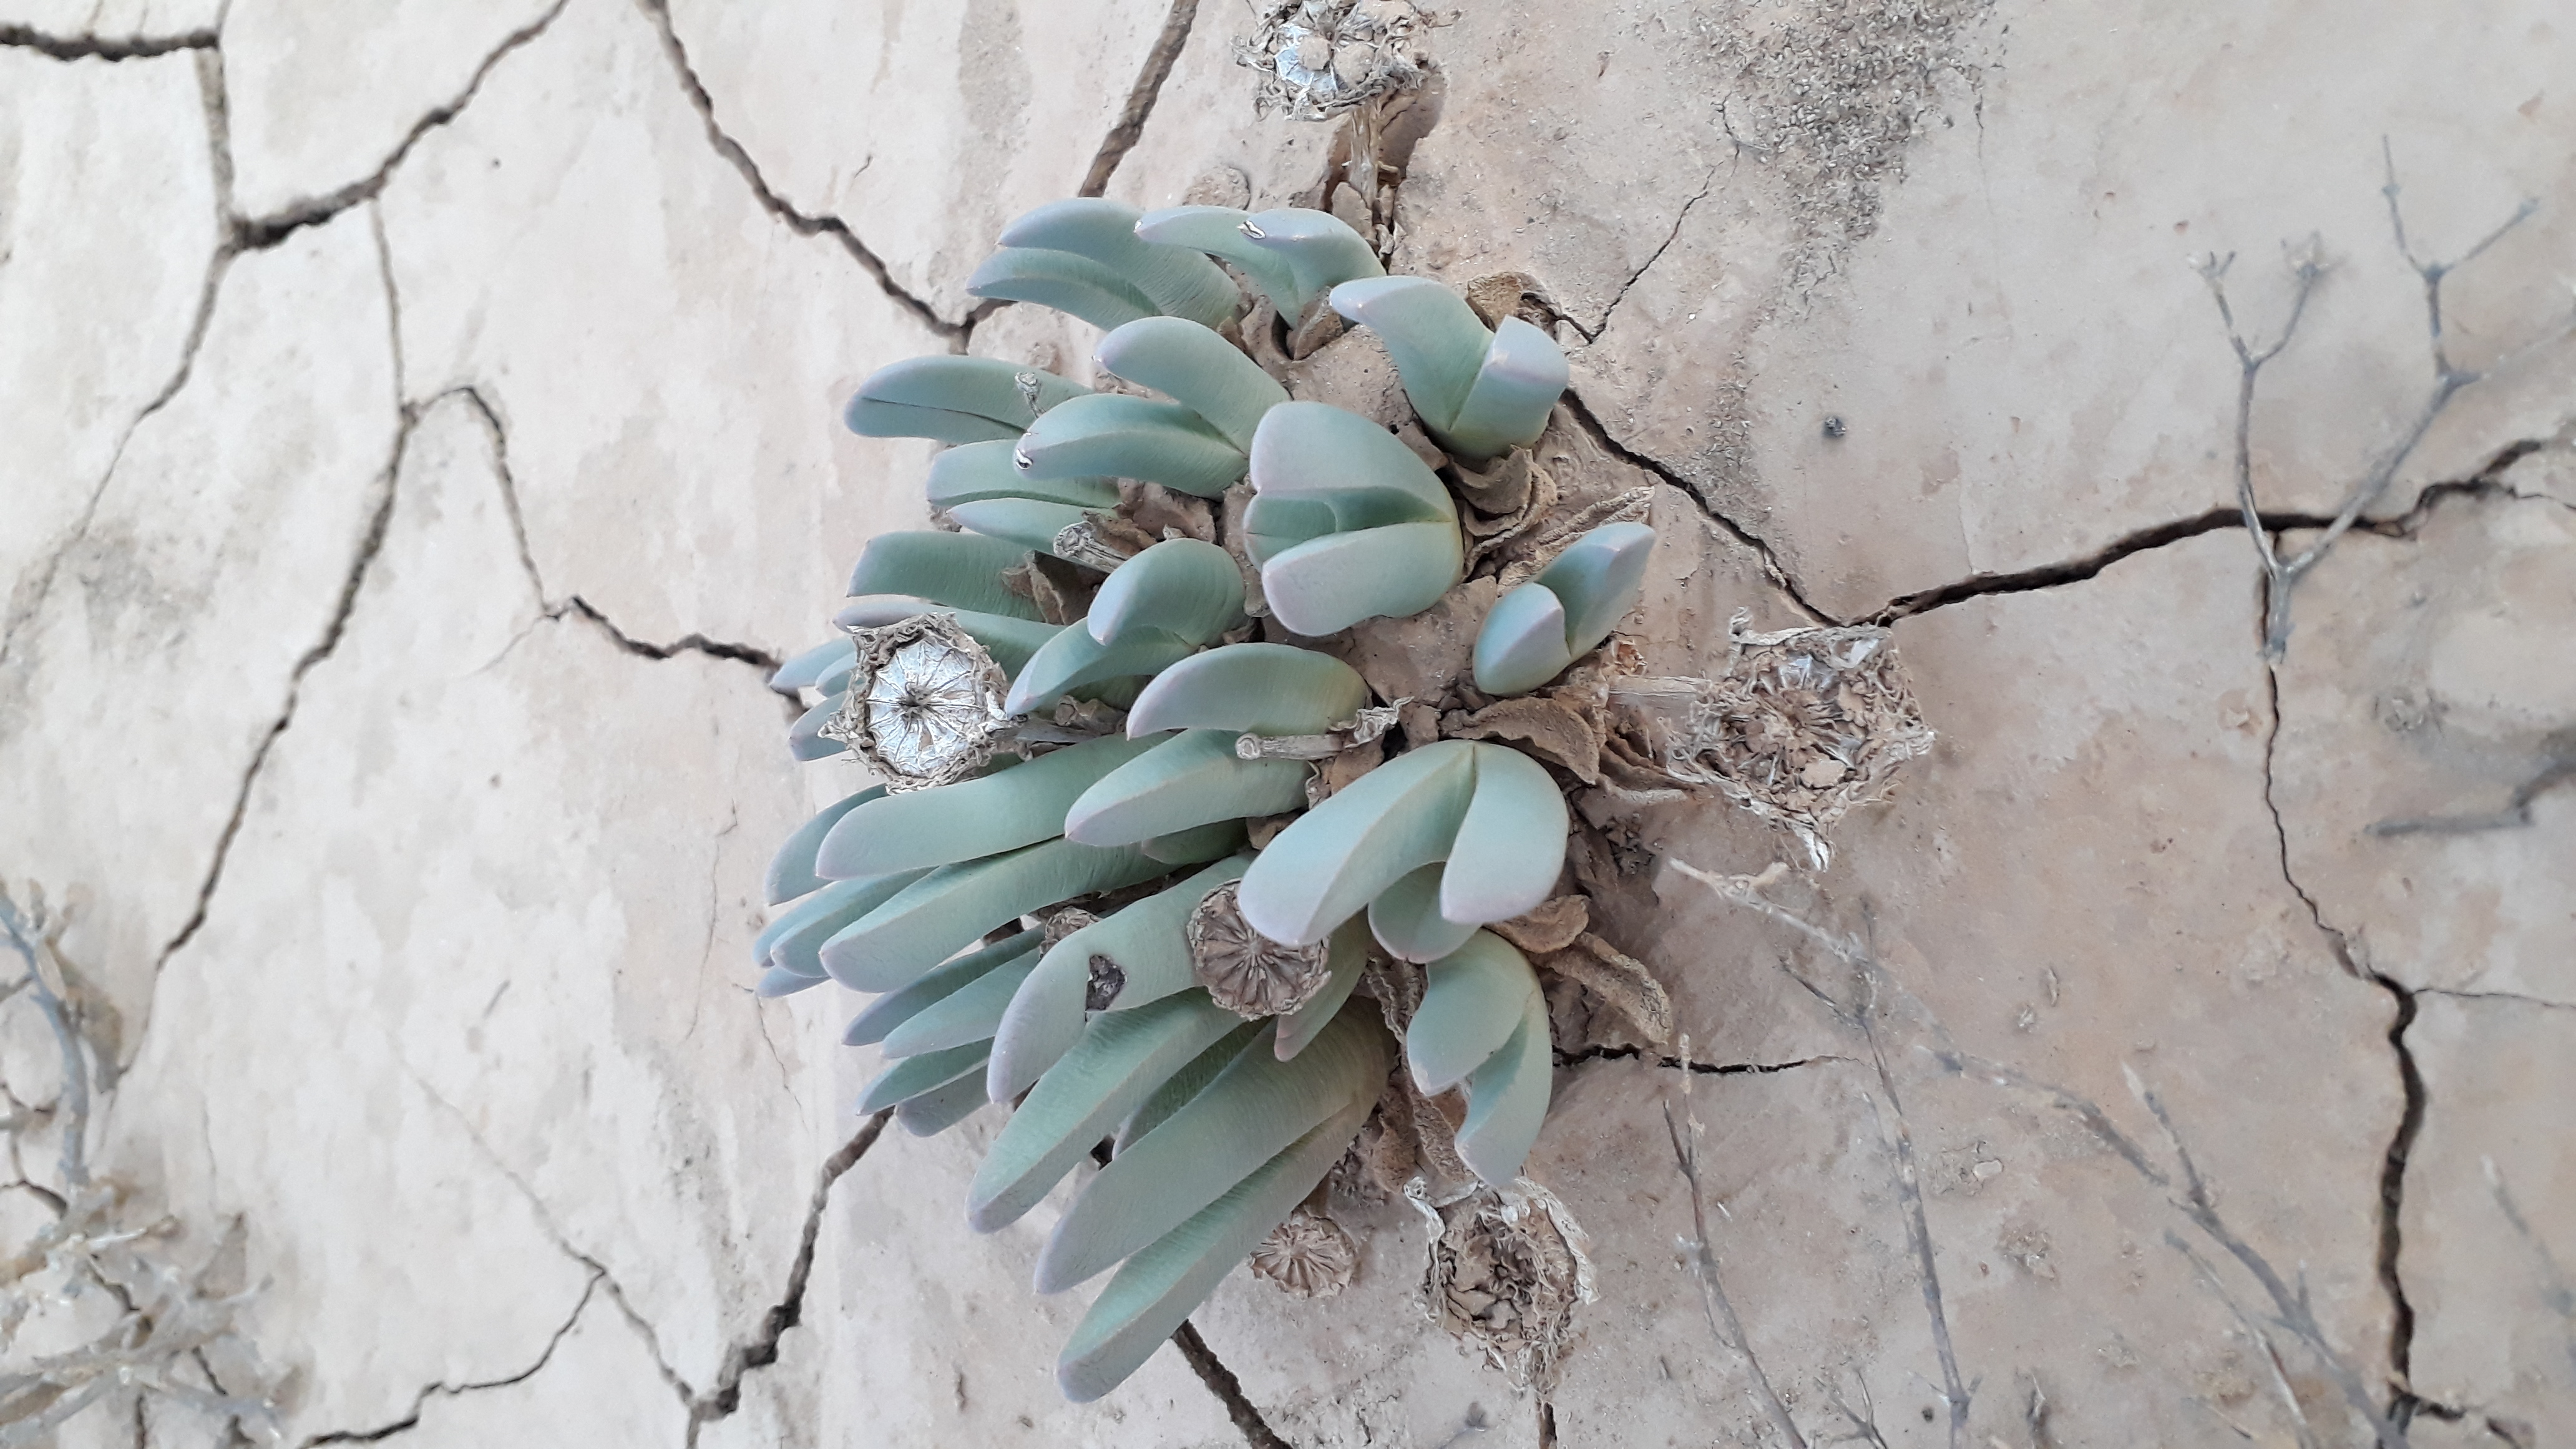 A succulent plant on cracked ground with several seed capsules.